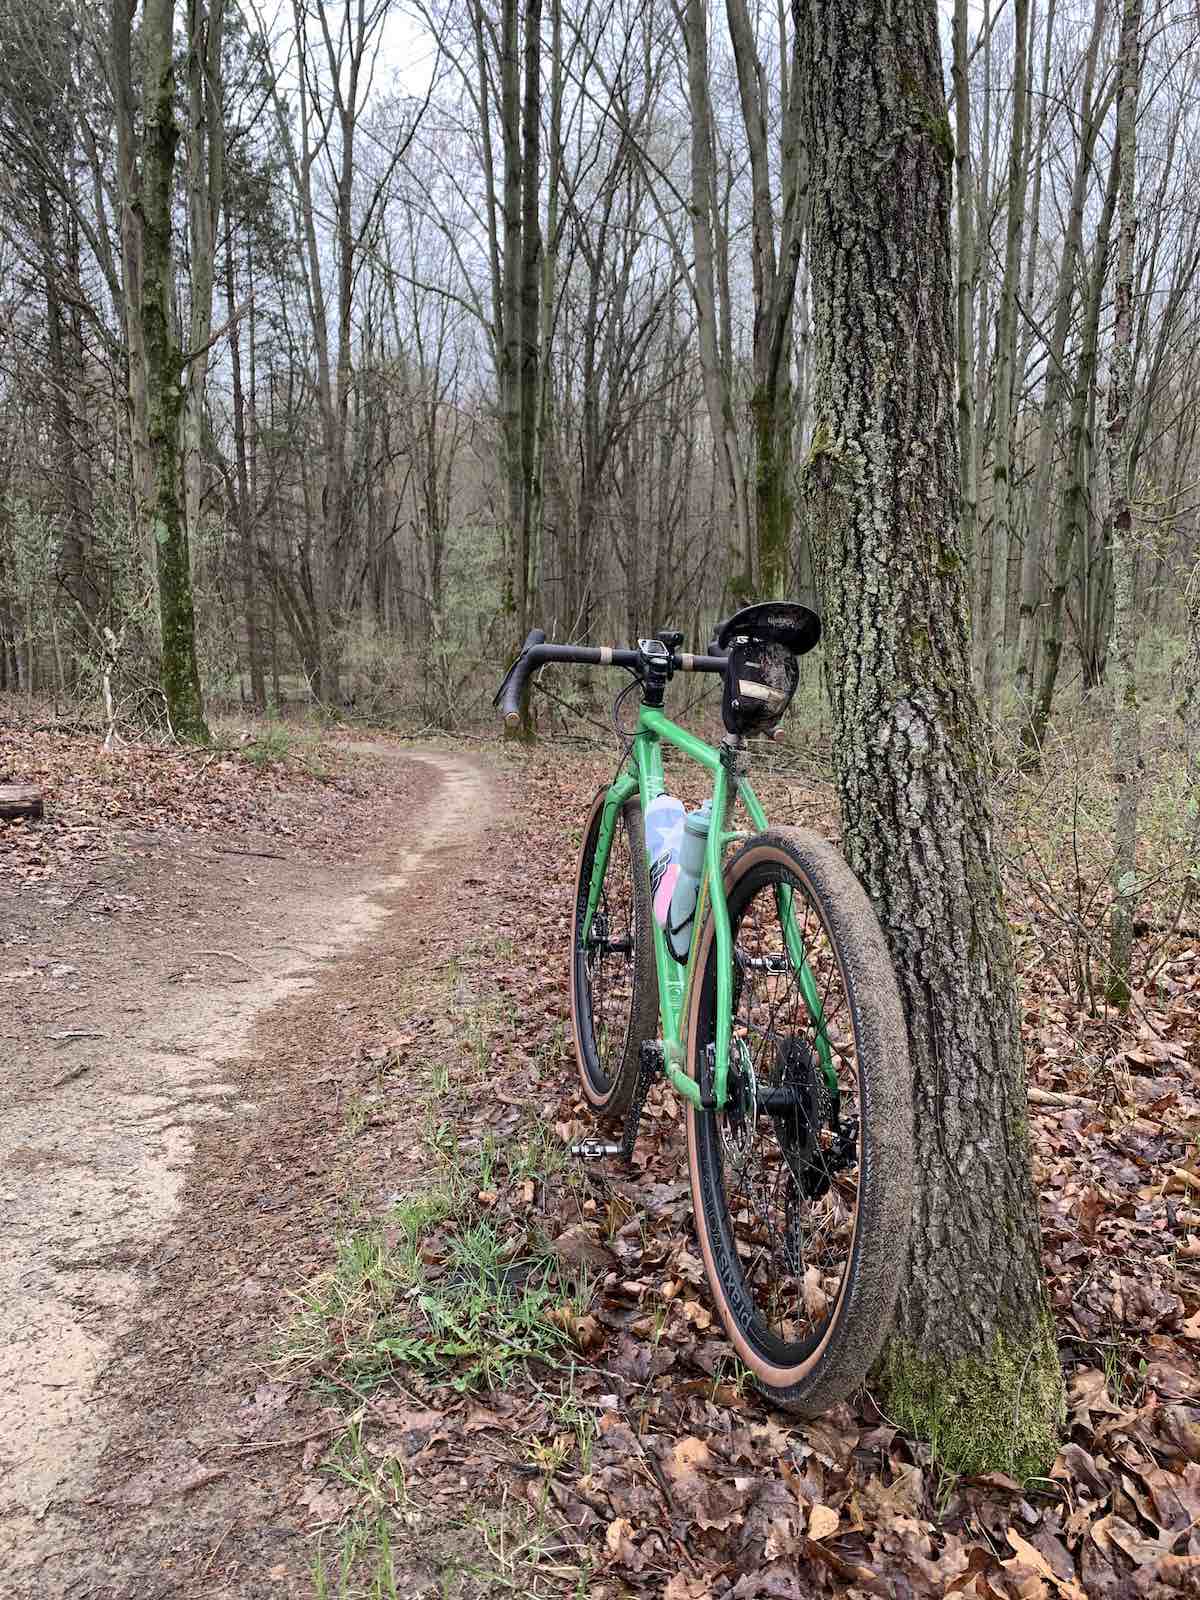 bikerumor pic of the day a green bicycle leans against a tree on a dirt trail in the woods. small leaves are beginning to show that spring is coming.